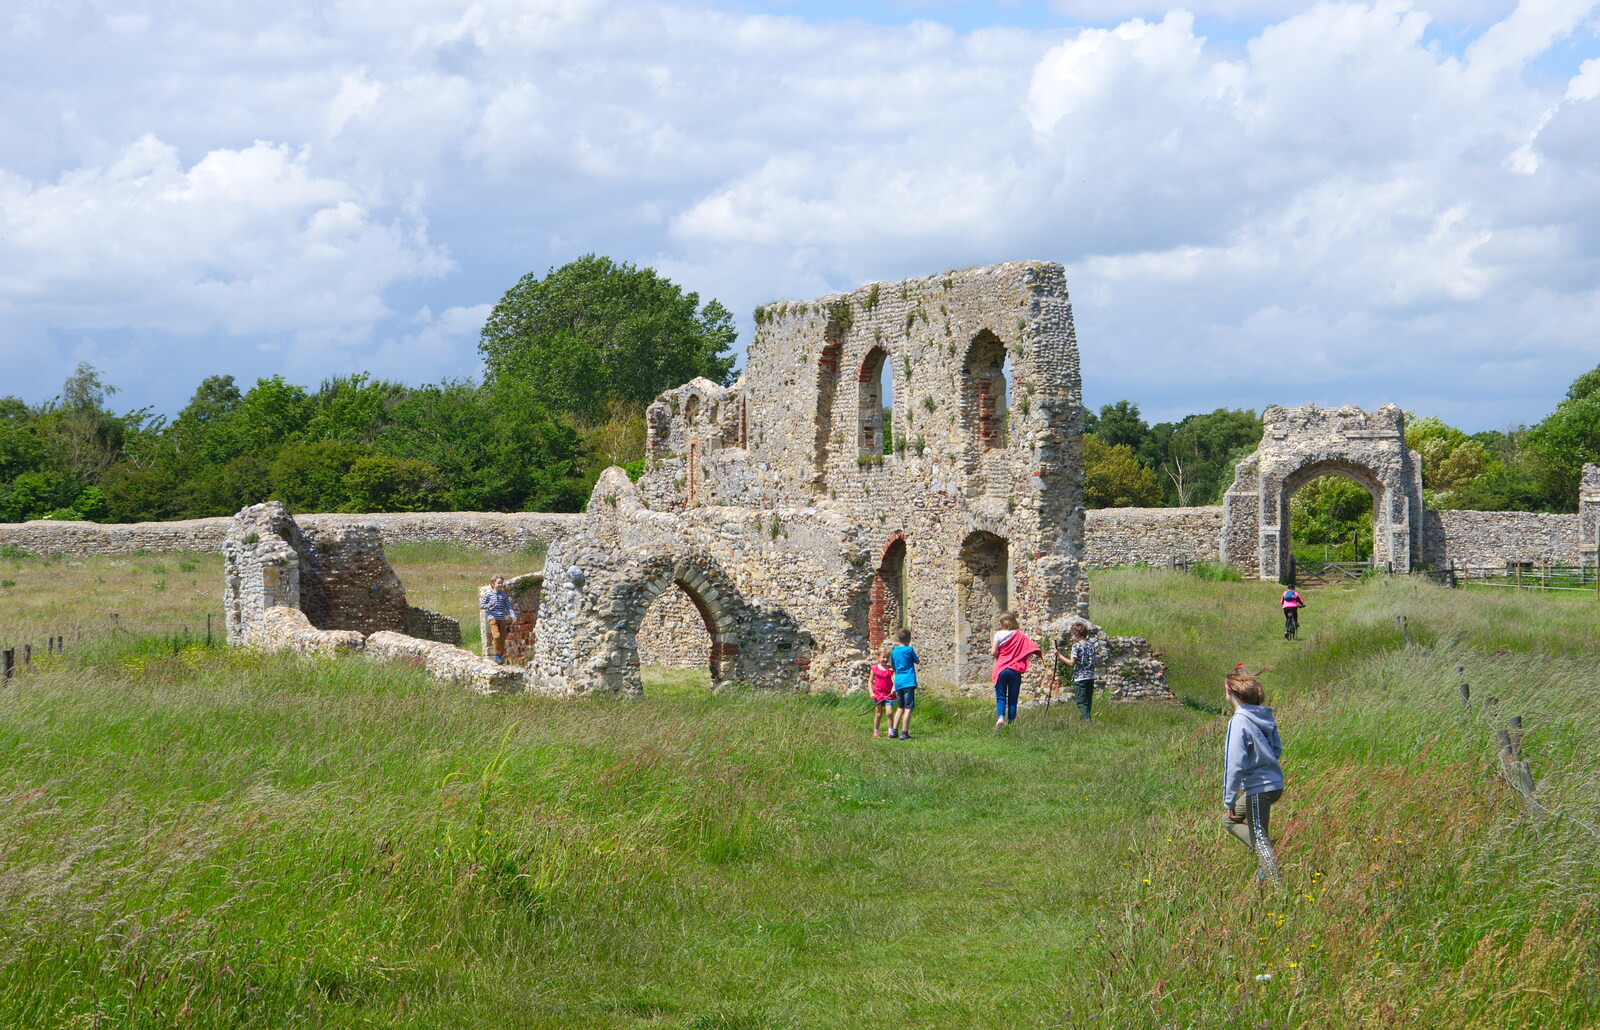 The kids have a quick explore of the abbey ruins from Cliff House Camping, Dunwich, Suffolk - 15th June 2019